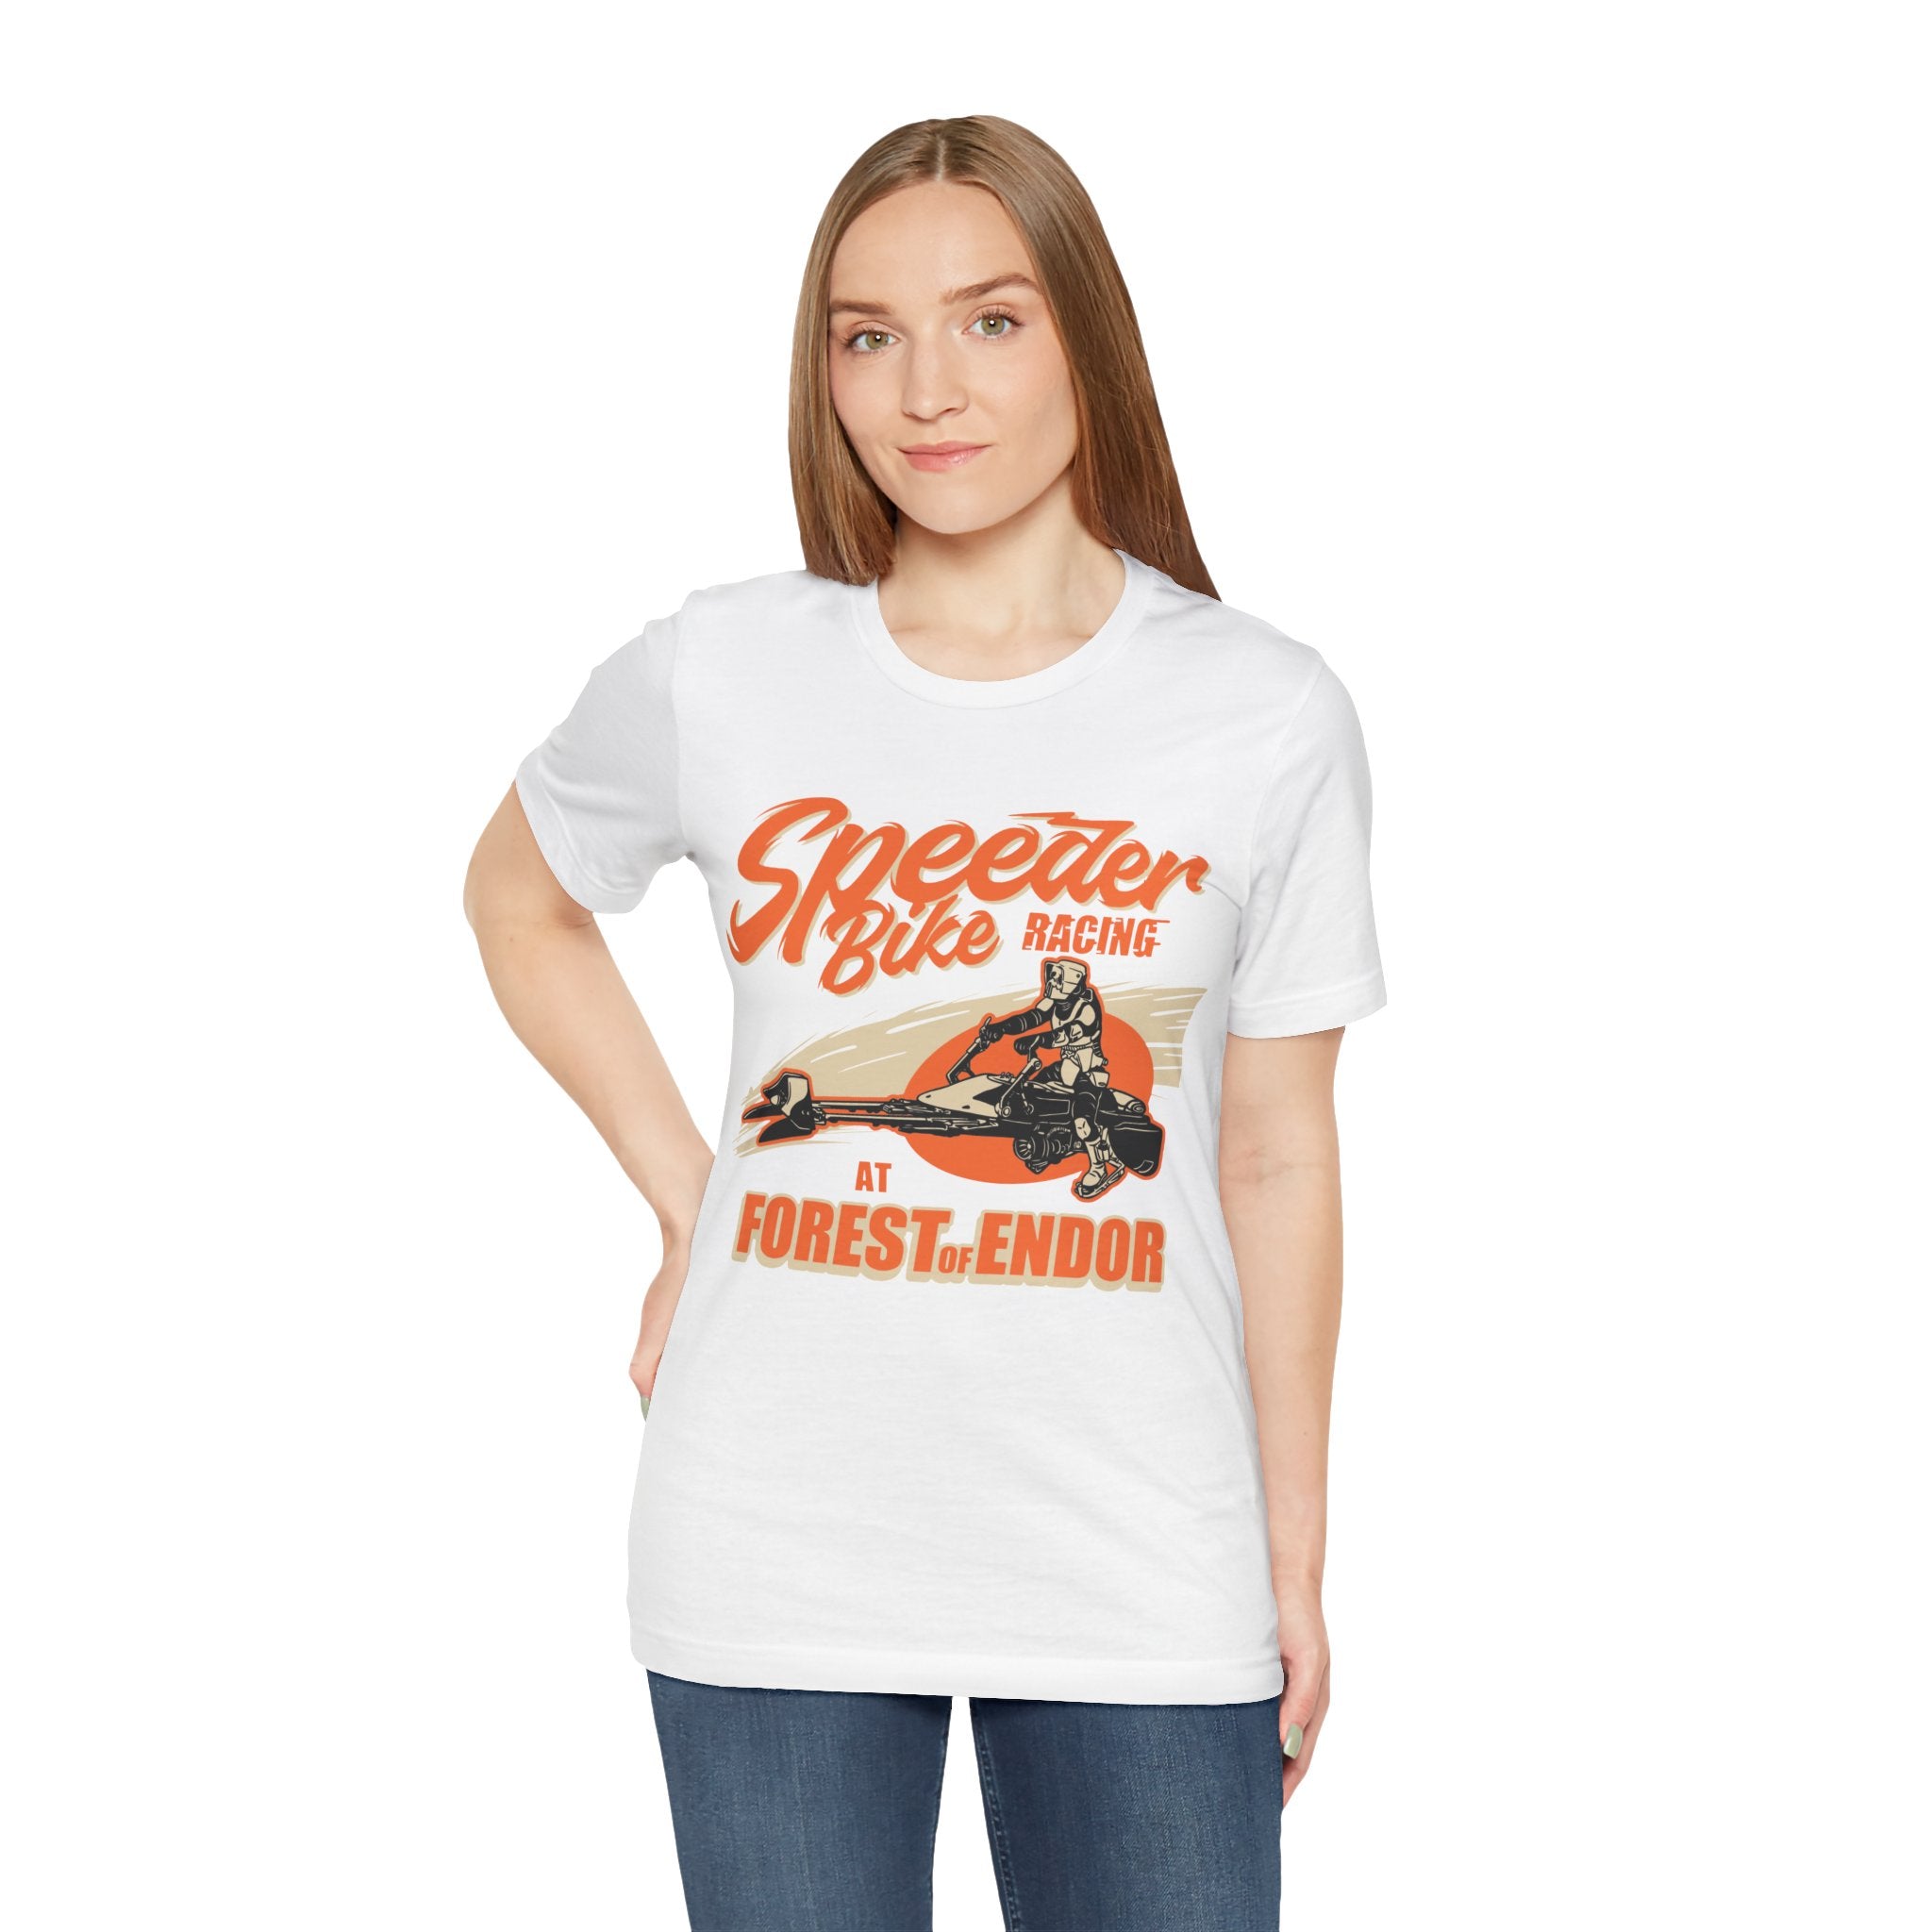 Woman wearing a white Speeder Bike Racing tee with "Speeder Bike Racing at Forest of Endor" graphic, featuring a silhouette of a speeder bike.